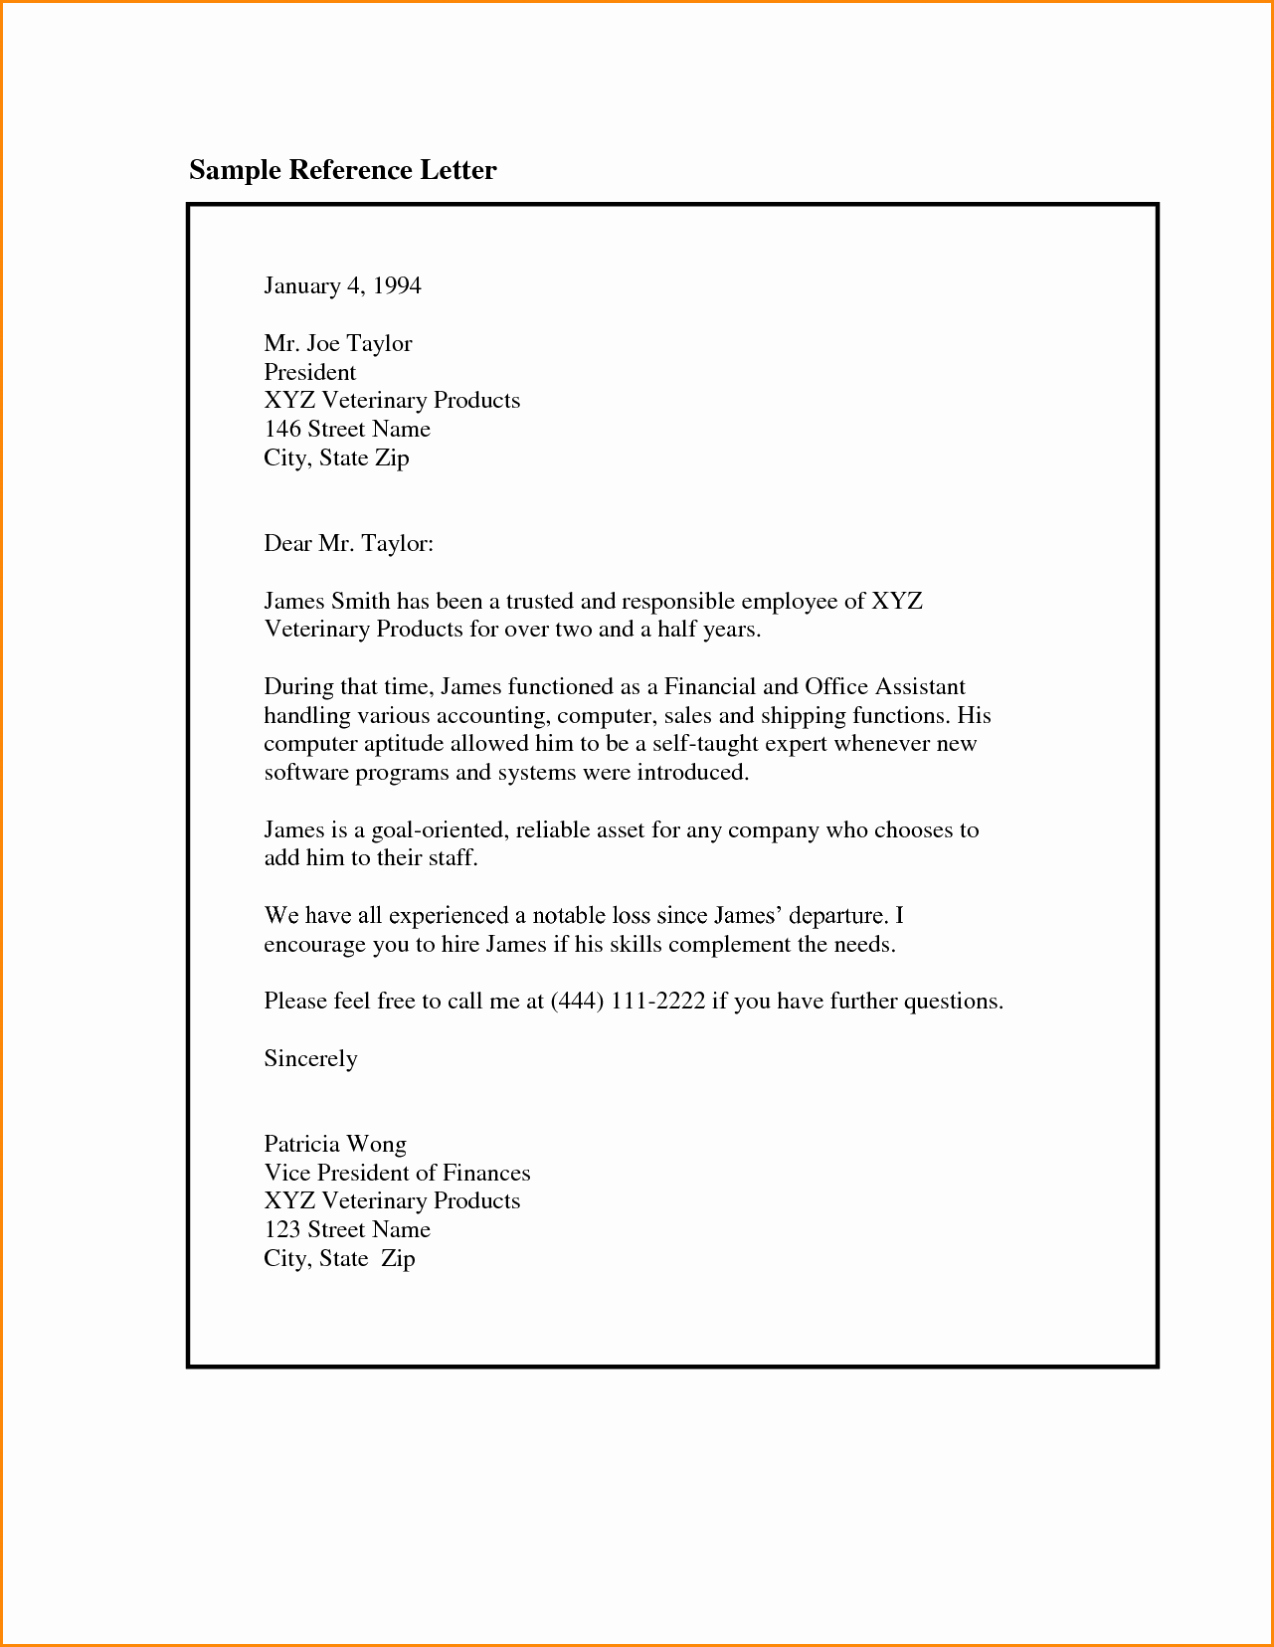 Heading for Letter Of Recommendation Awesome Reference Letter format Template Sample